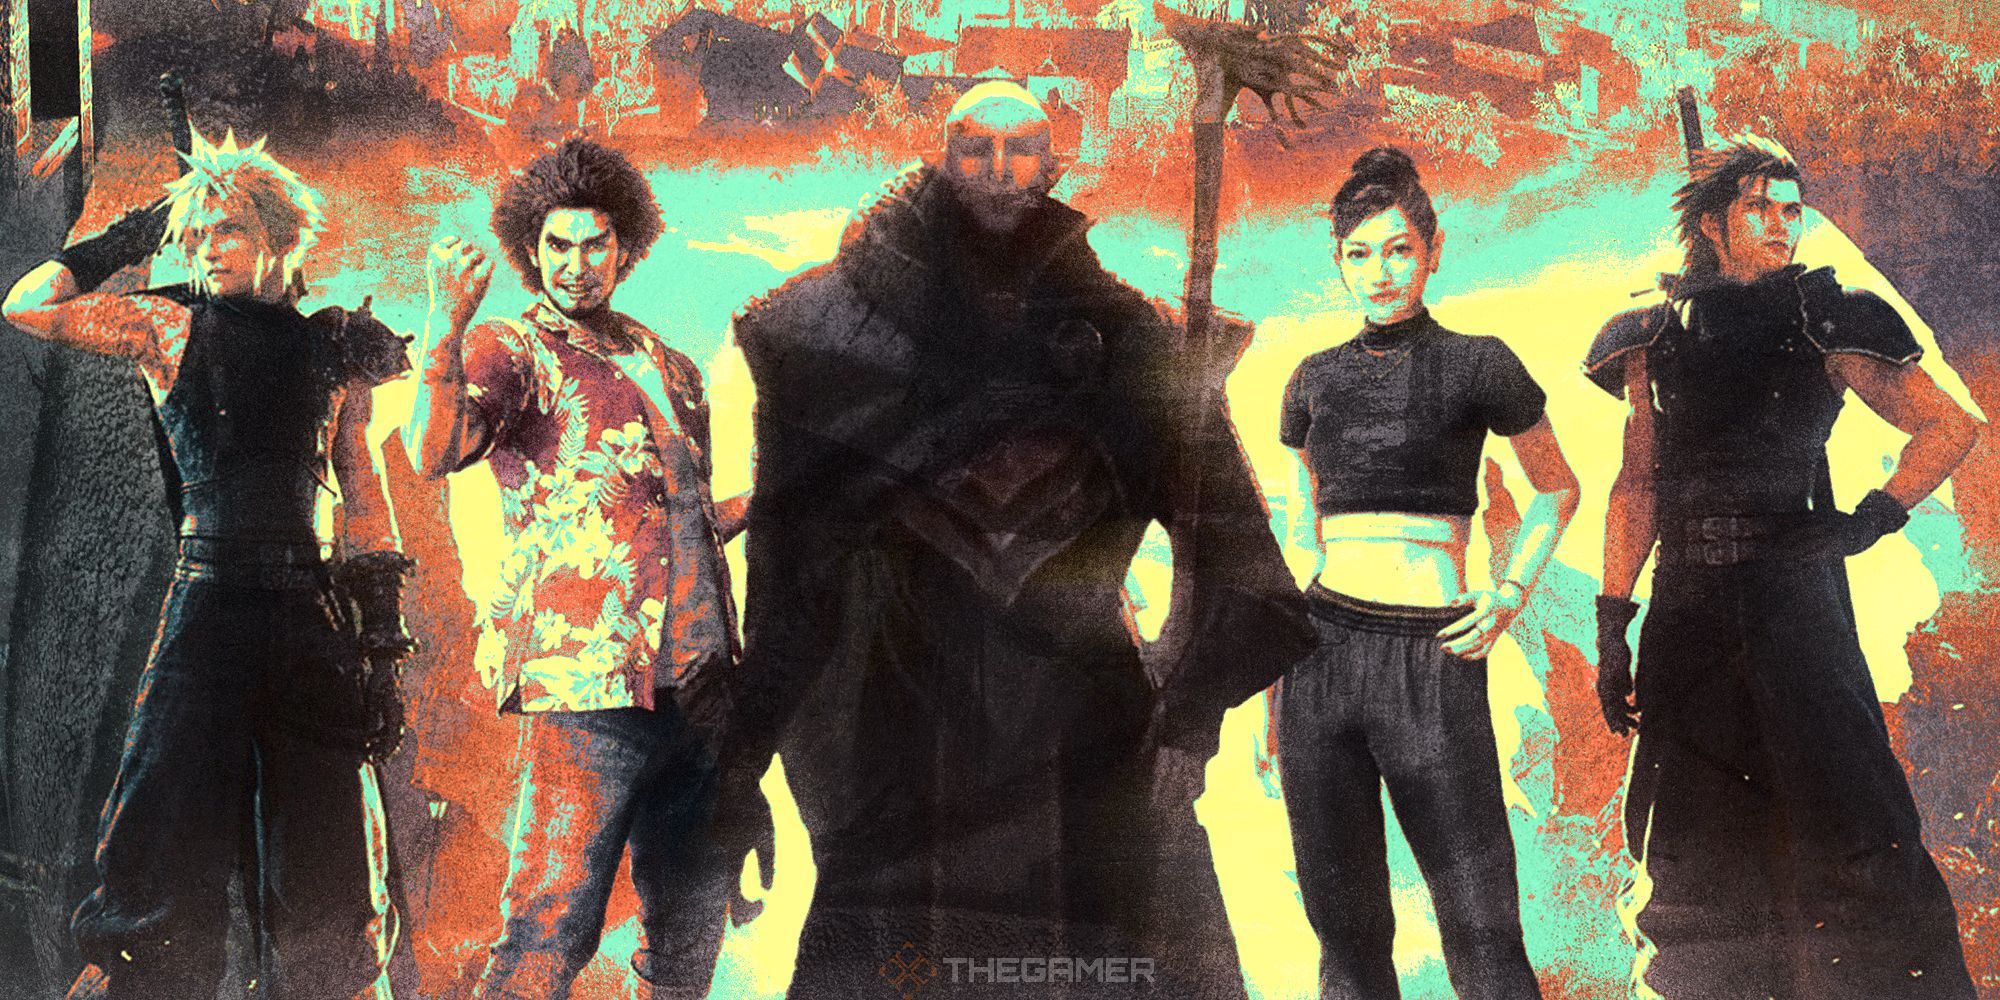 Solas from Dragon Age Dreadwolf lined up with Cloud and Zack from FF7 and Ichiban and Chitose from Like a Dragon